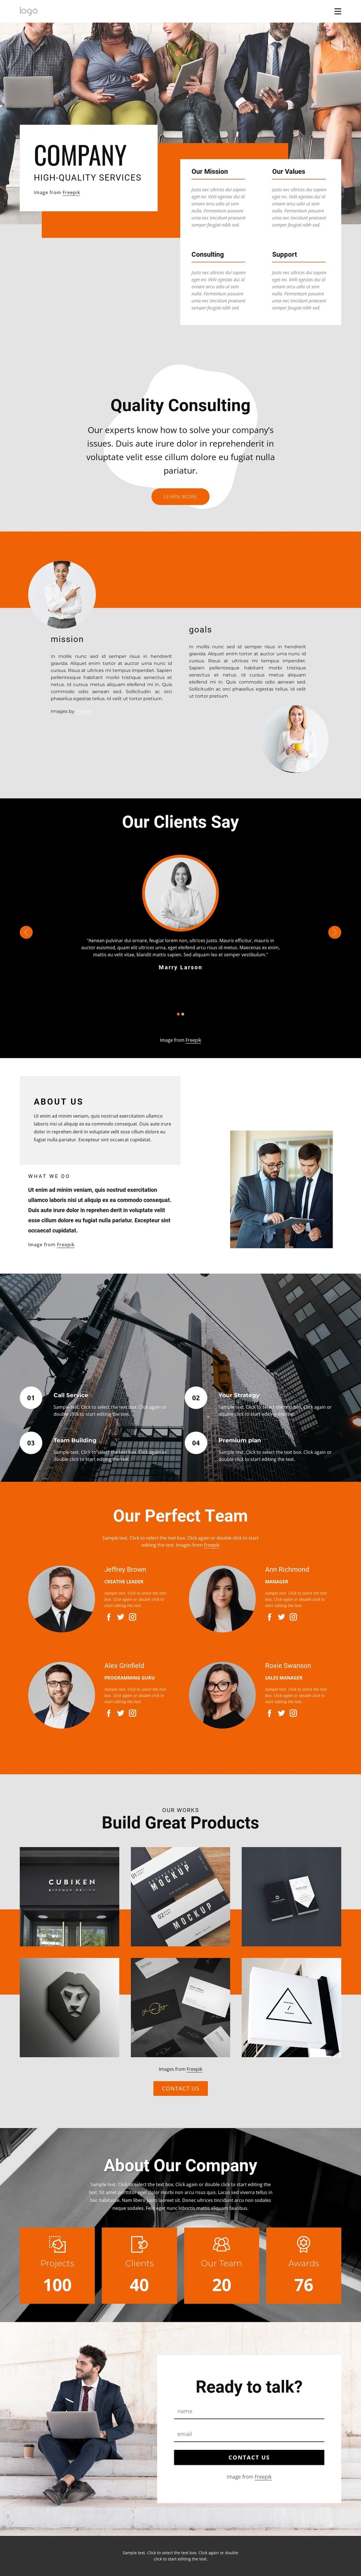 Hight quality consulting firm Template